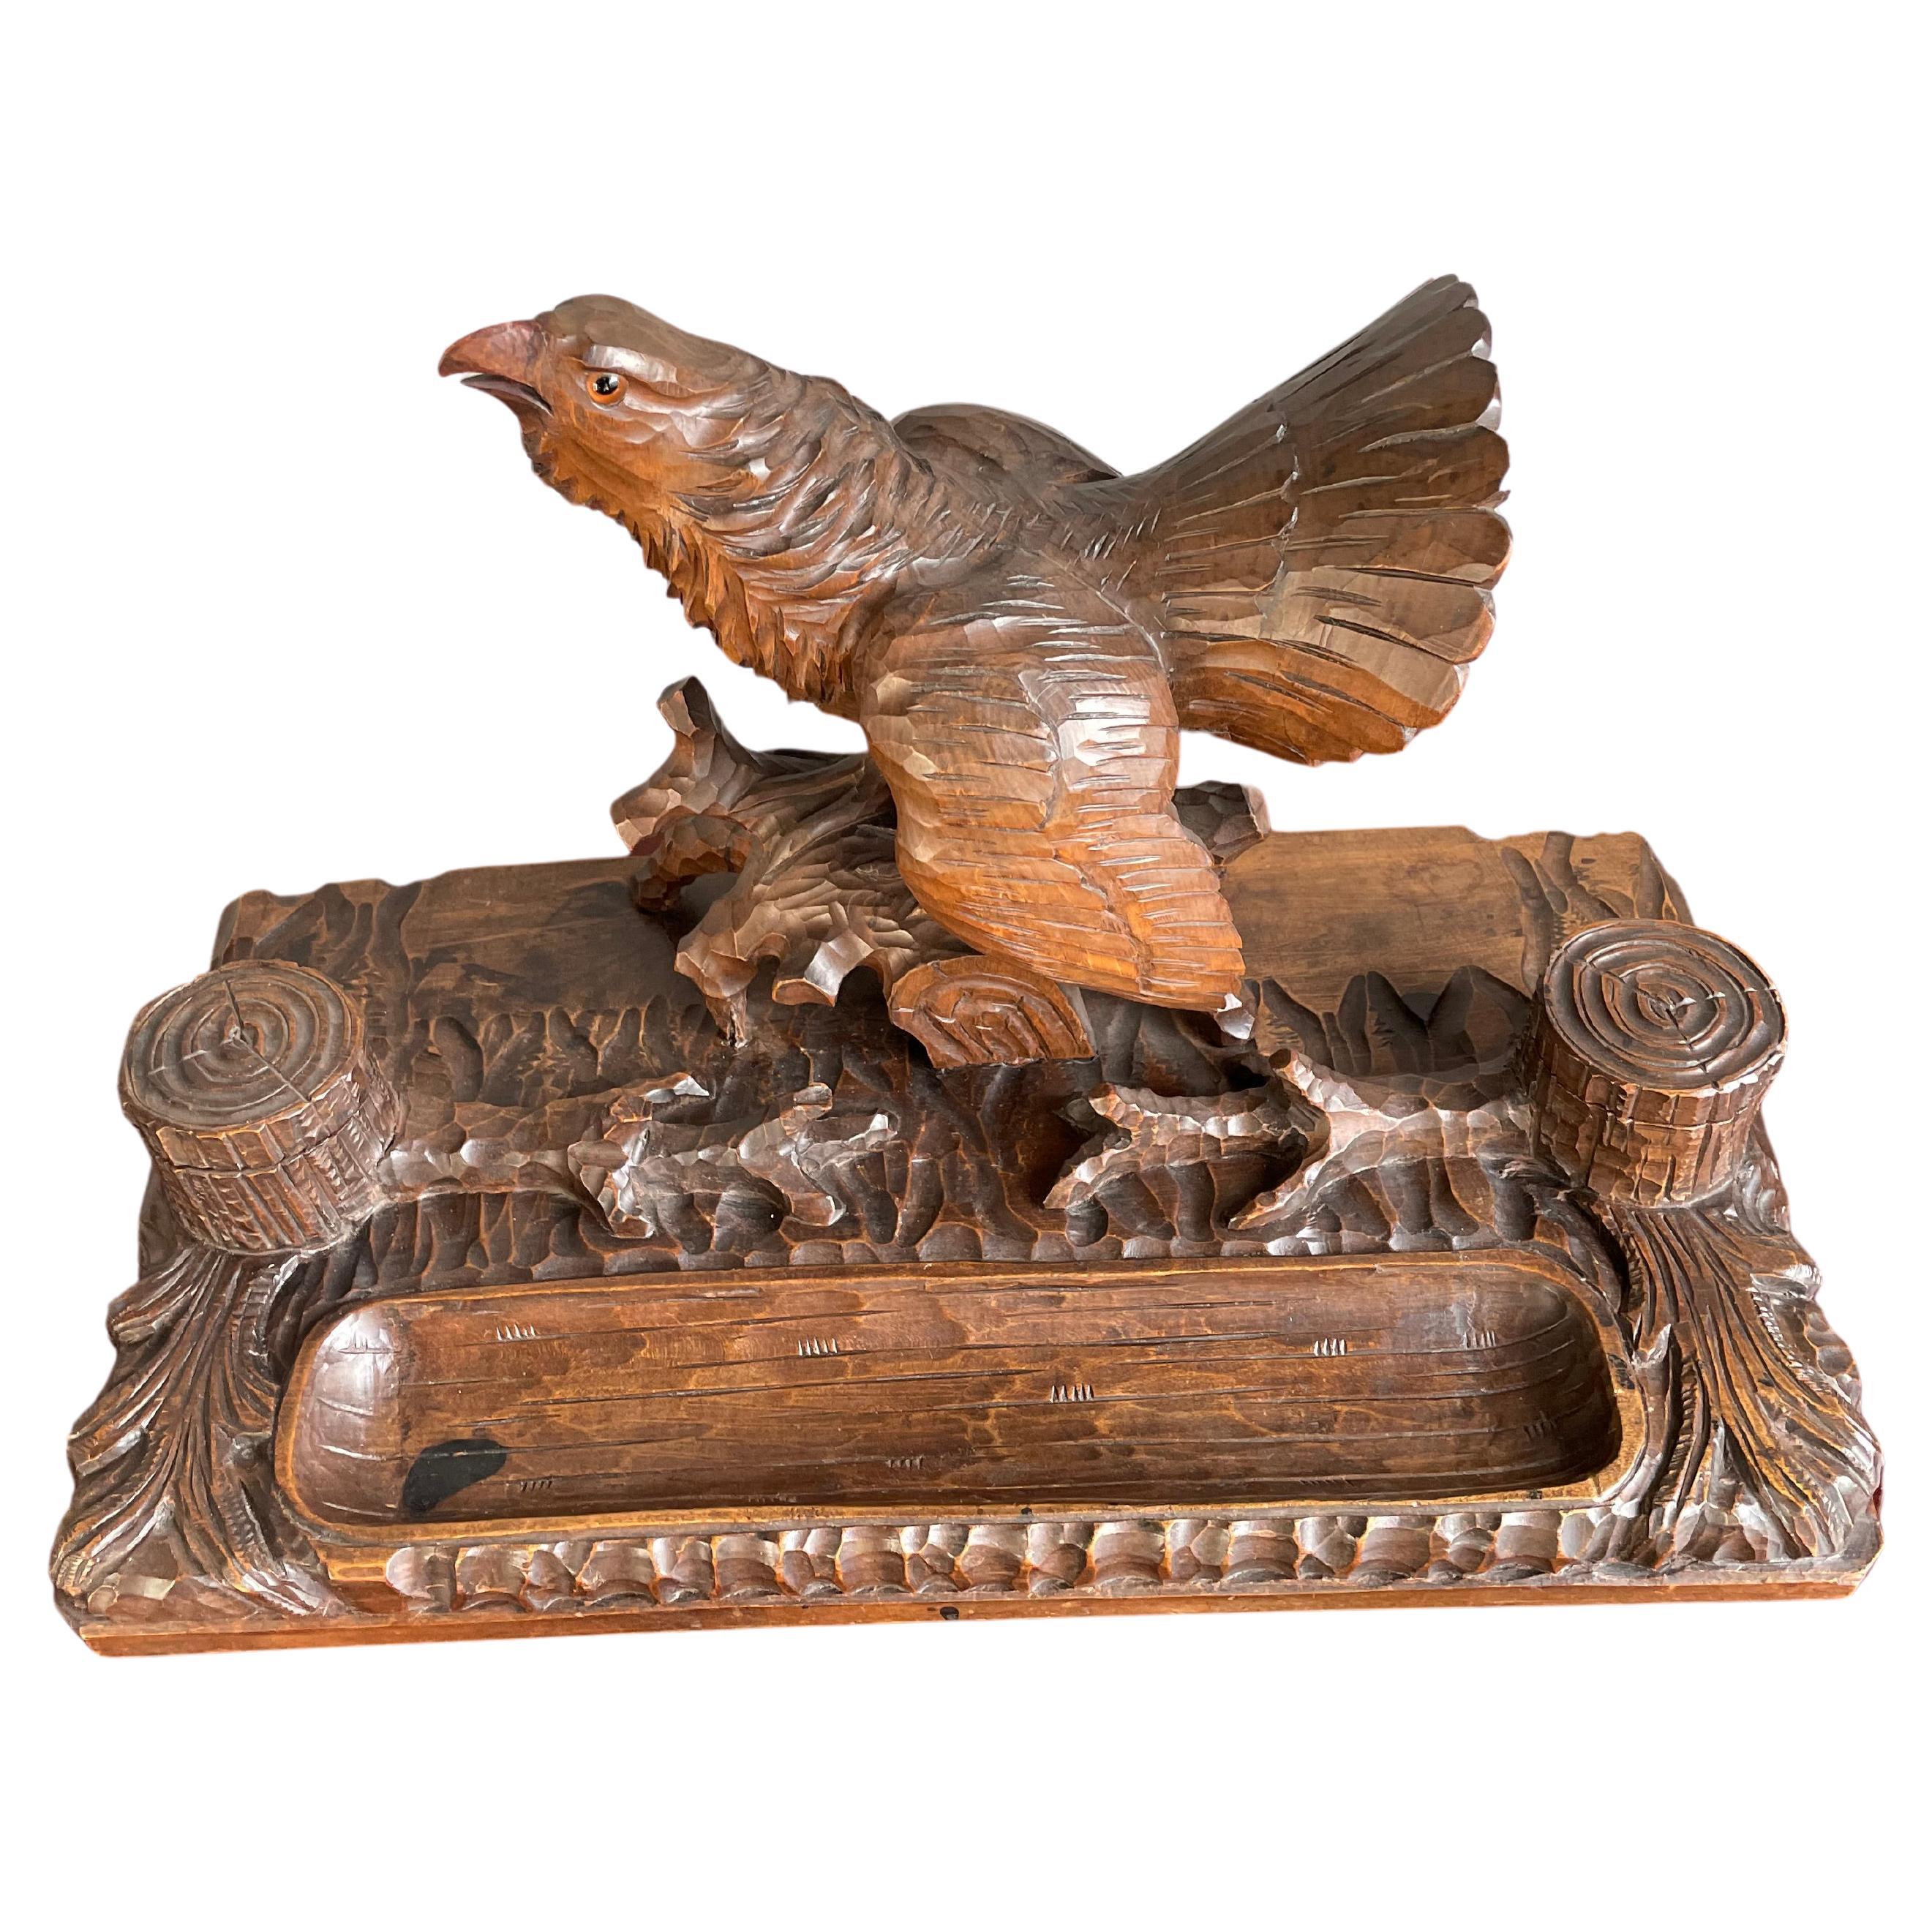 Antique & Large Black Forest Inkstand w. Capercaillie / Wood Grouse Sculpture For Sale